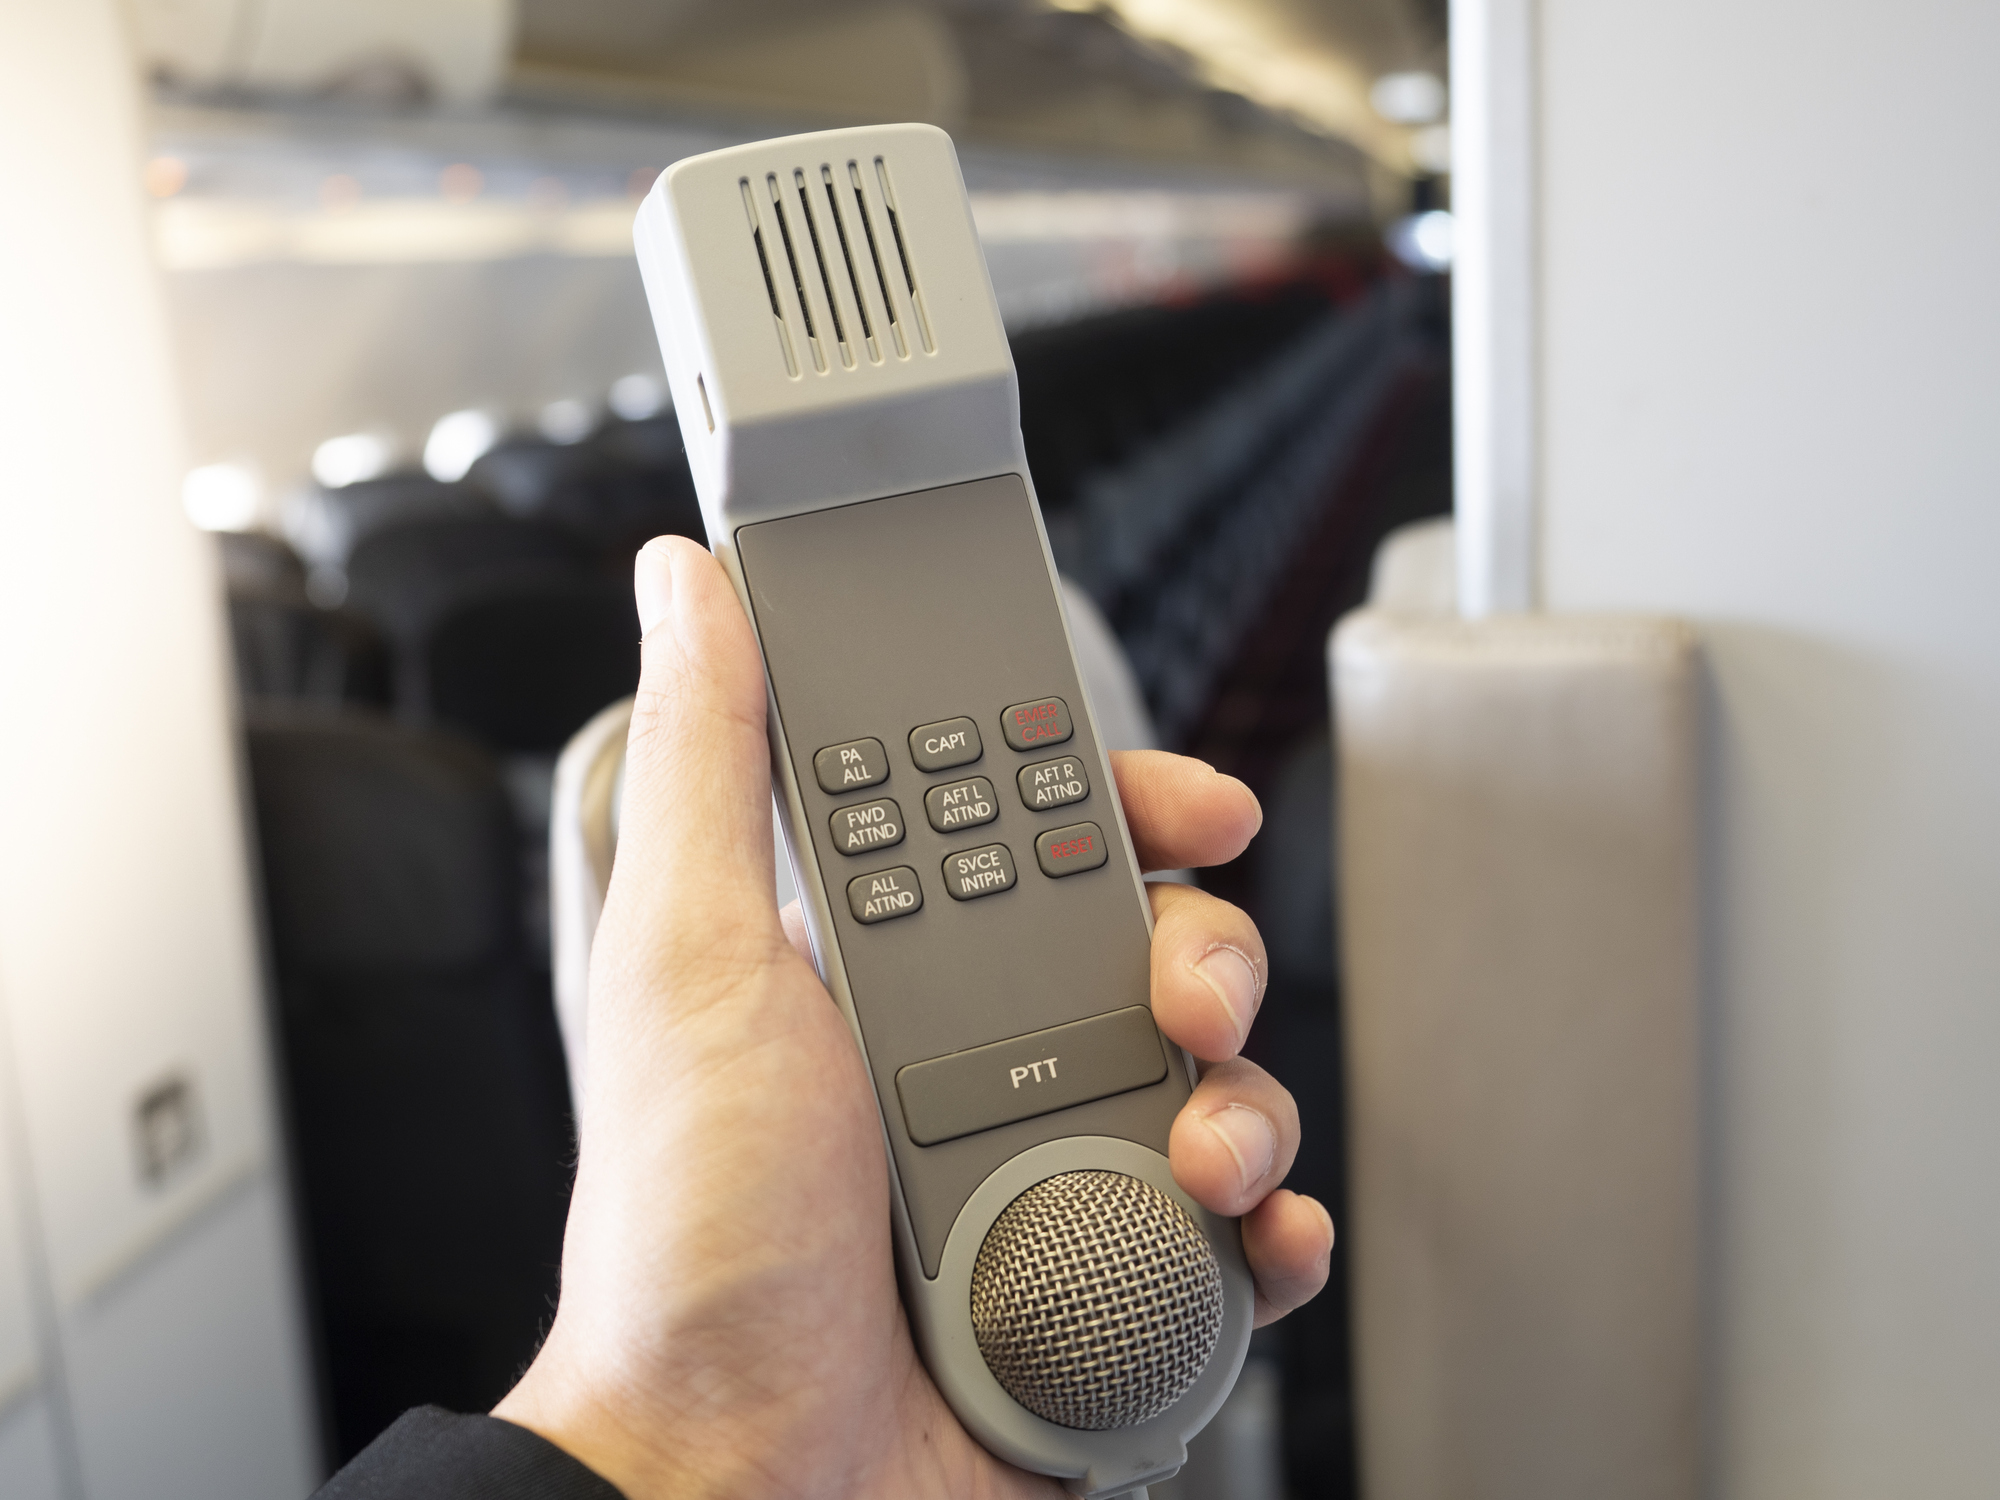 Male flight attendant holding in his hand an intercom in the airplane cabin.